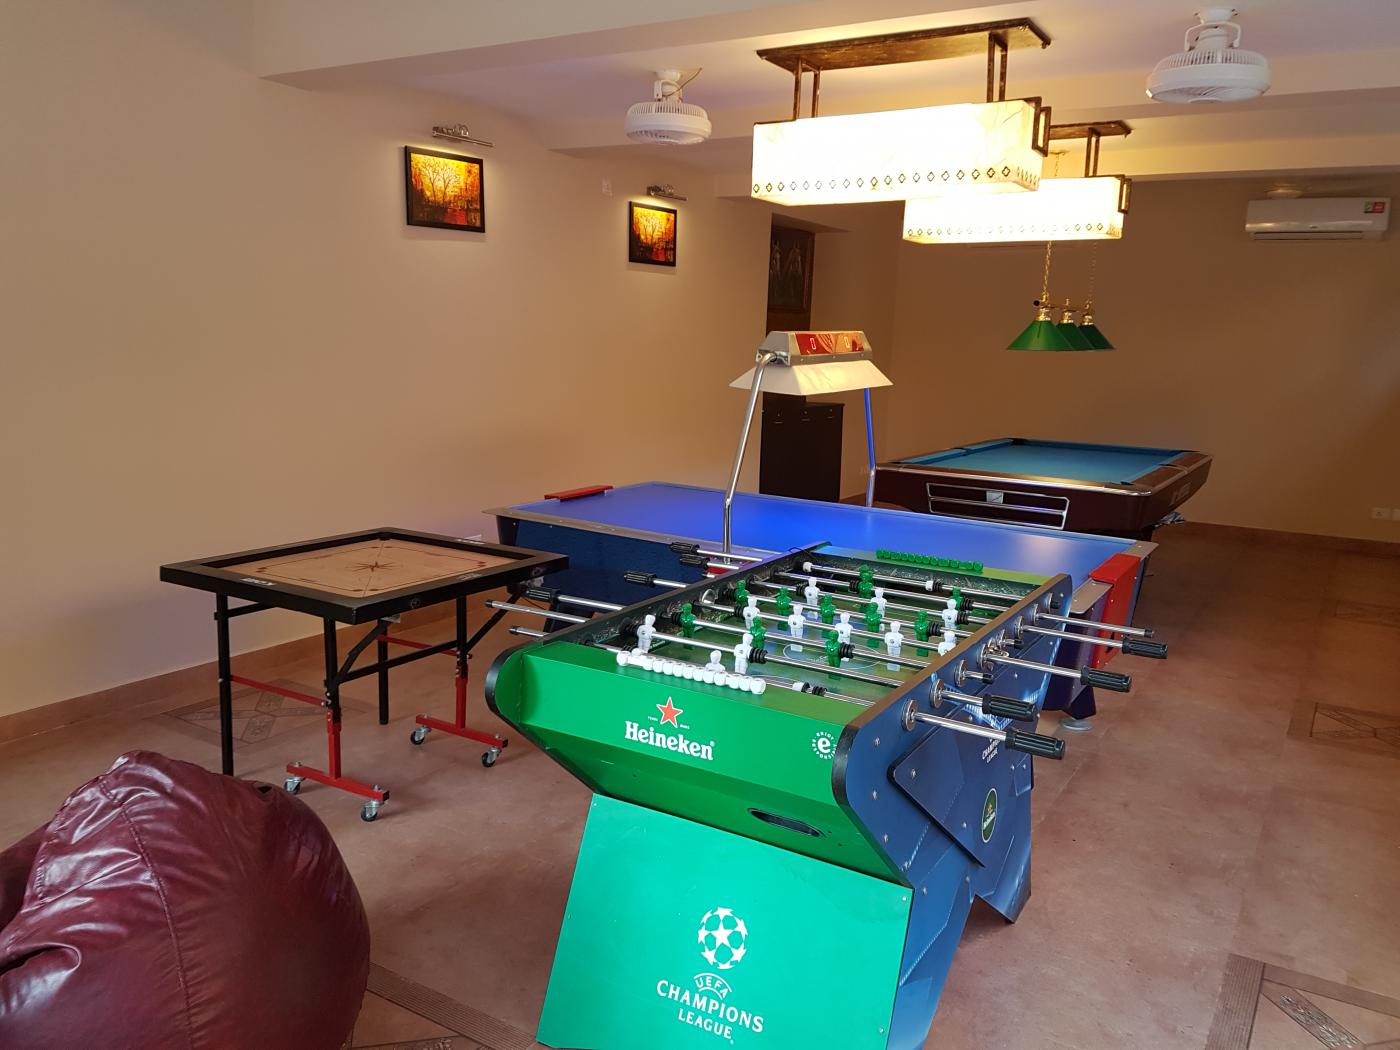 GAMES ROOMS